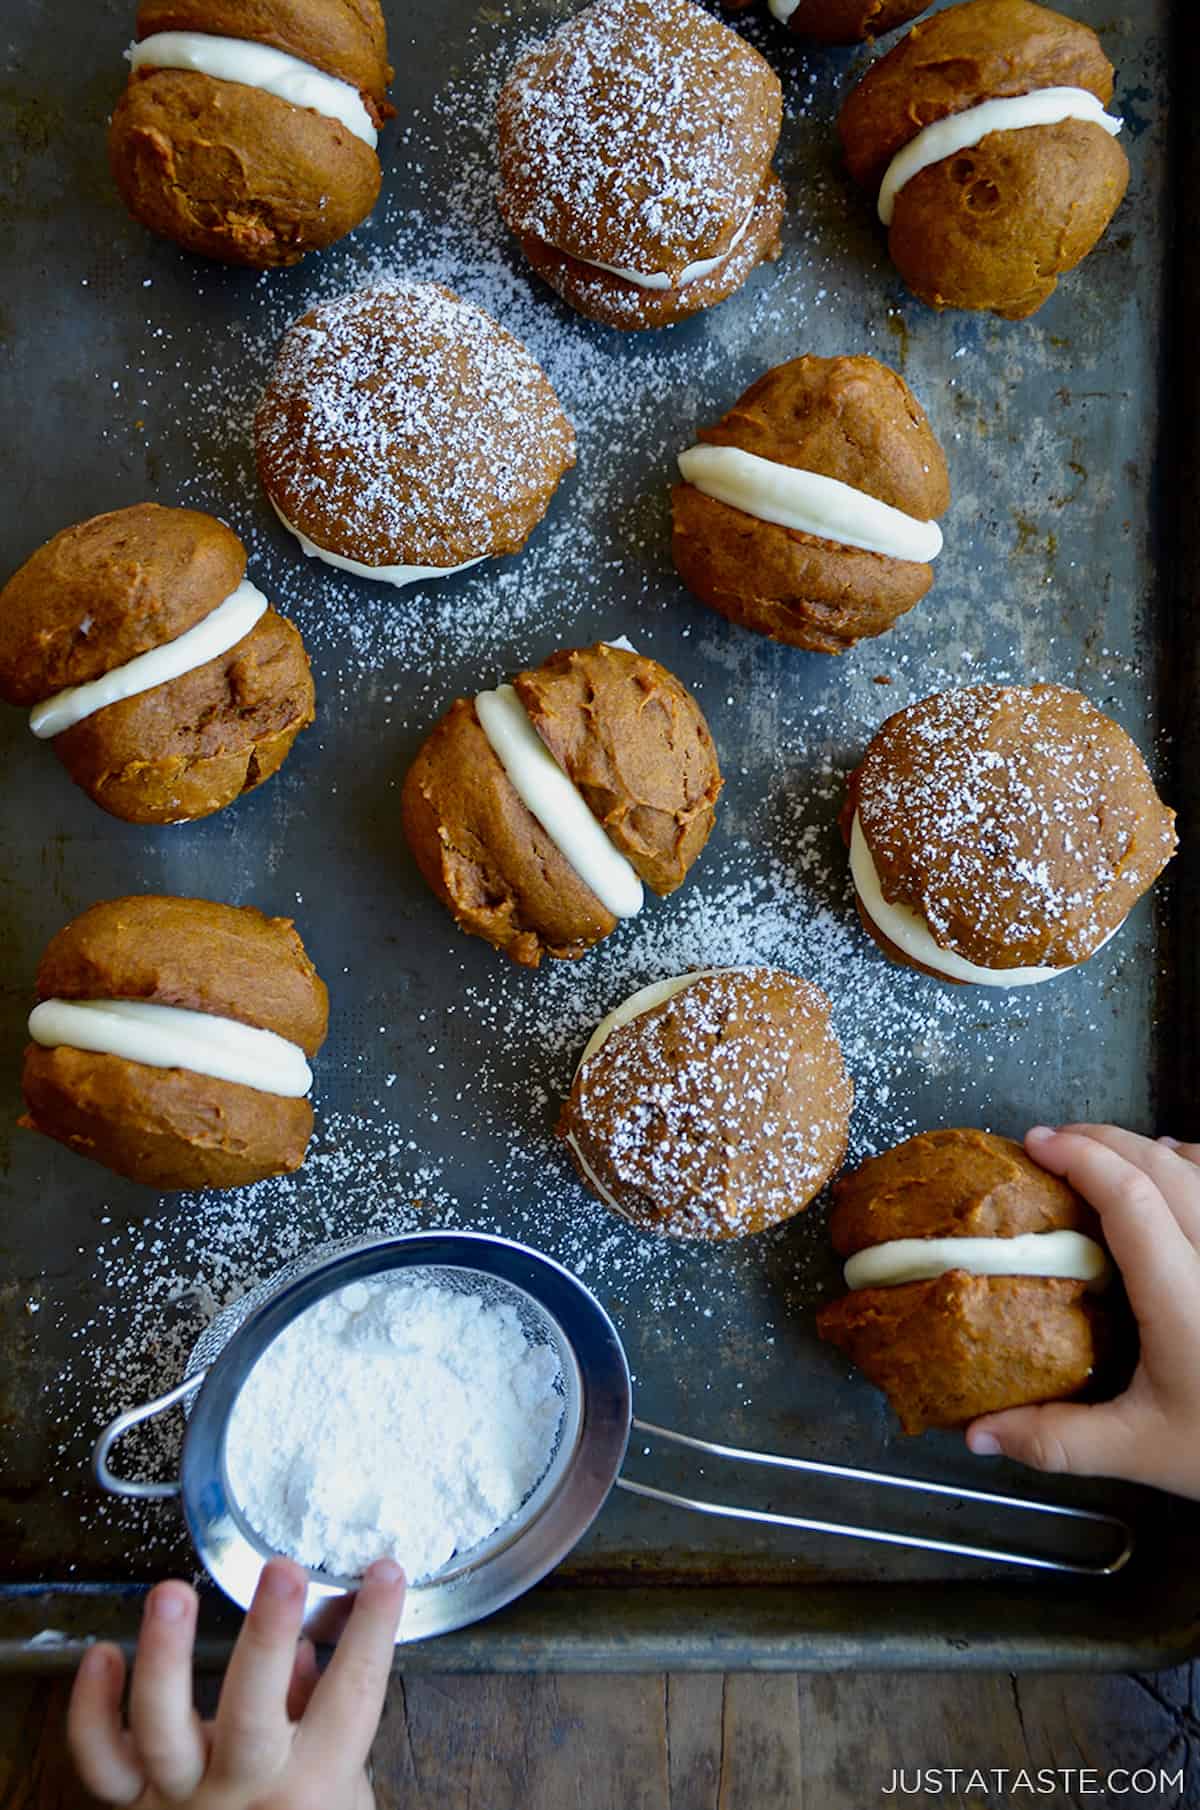 A sheet tray with pumpkin whoopie pies dusted with powdered sugar. A small fine mesh sieve with more powdered sugar sits off to the side and a small child's hands are grabbing a whoopie pie.